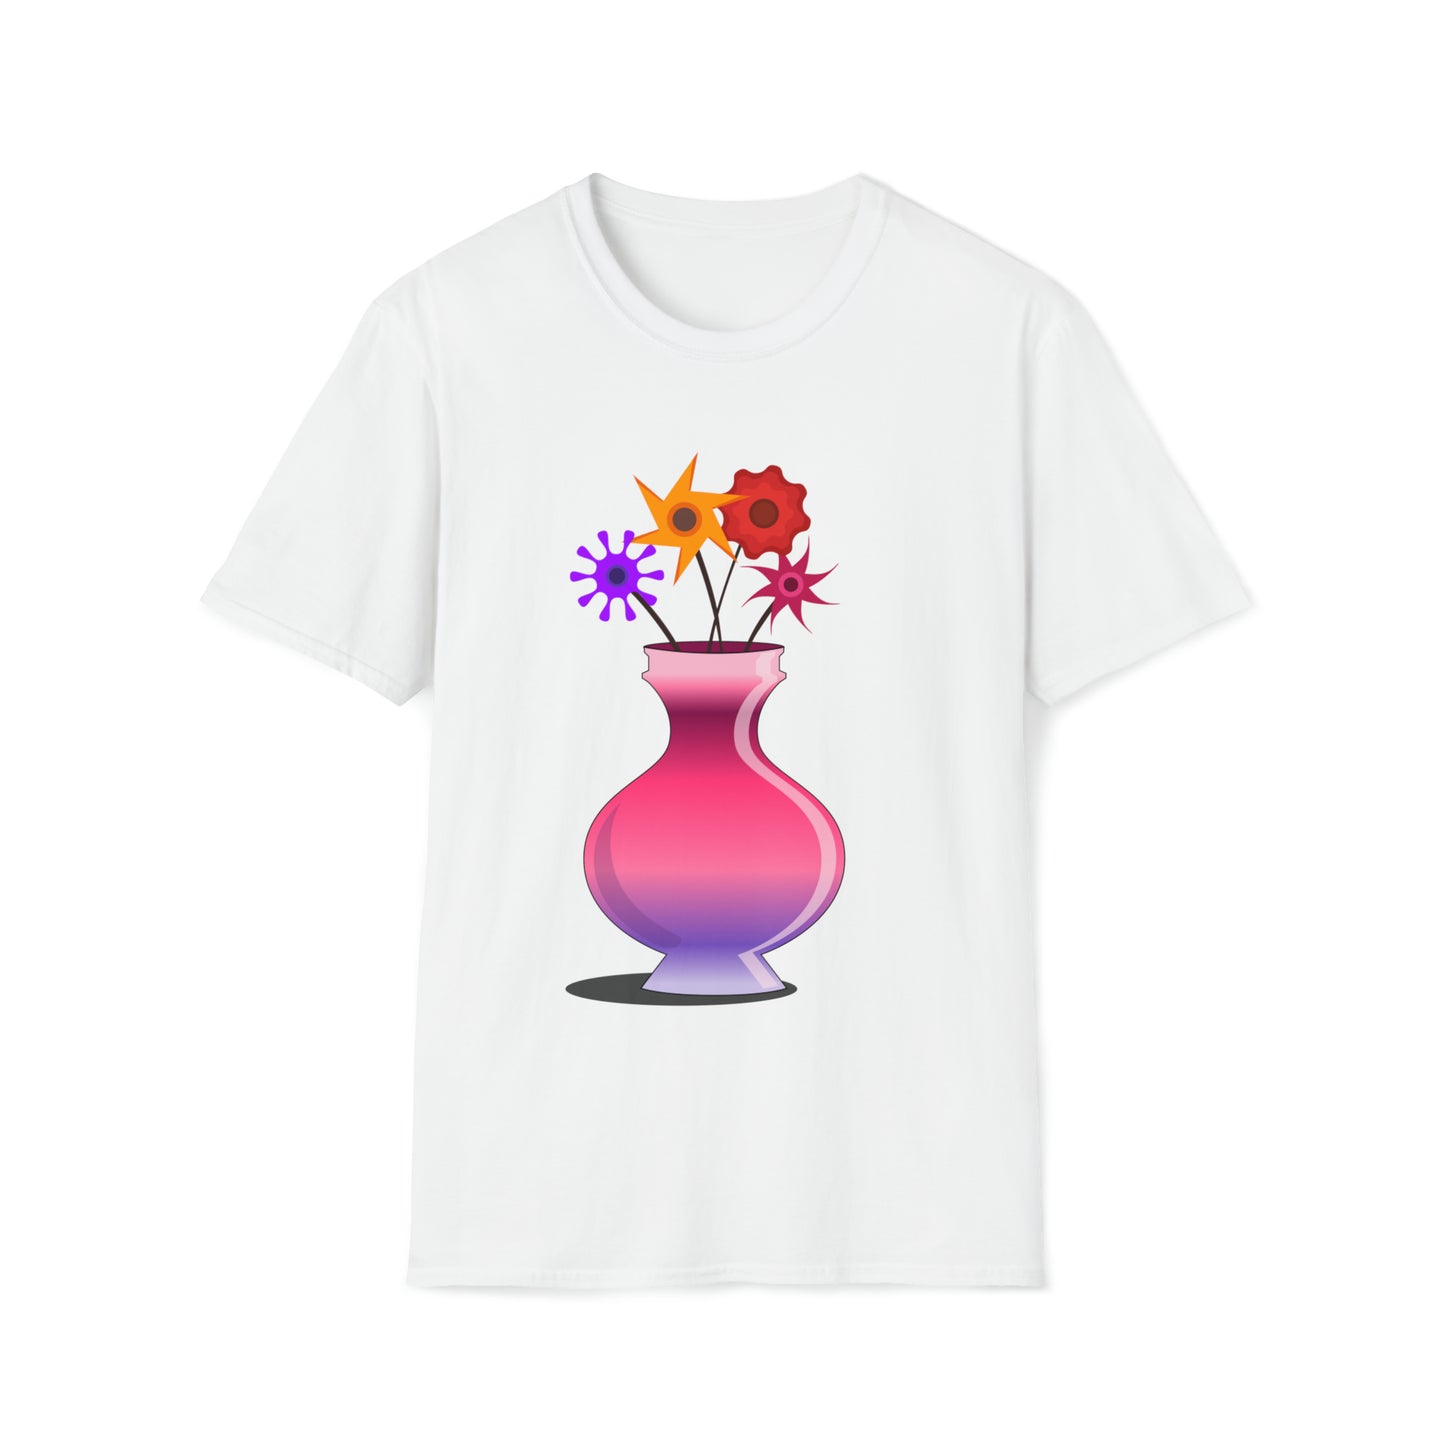 Flowers in a vase T-Shirt